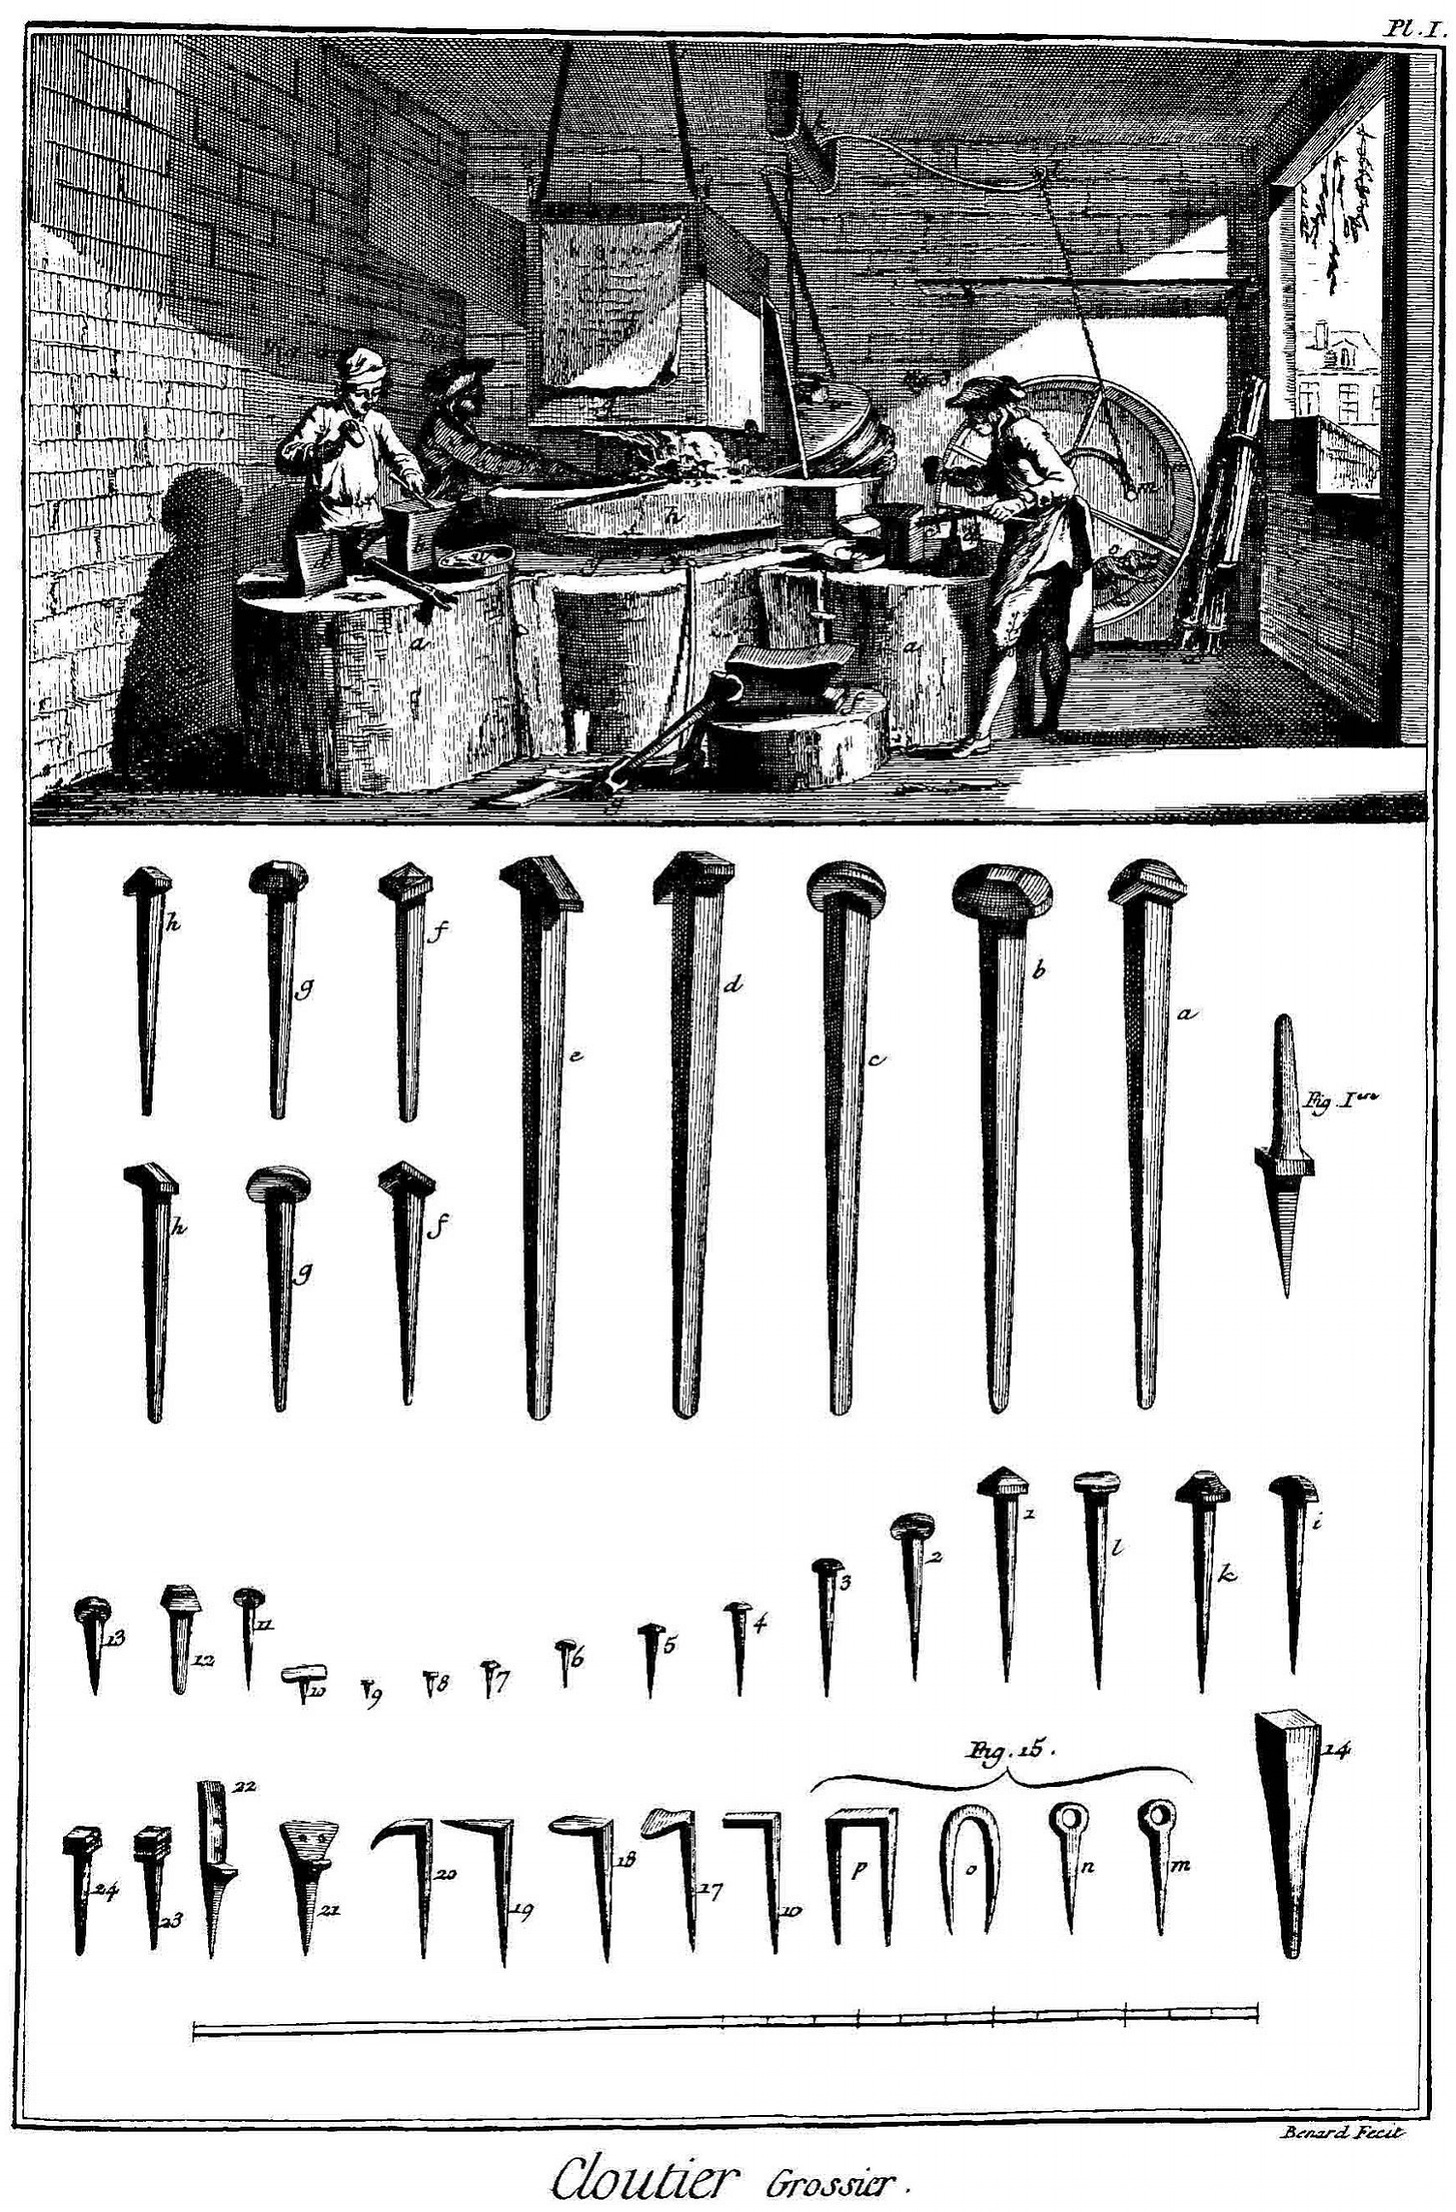 A nailer’s workshop and the variety of nails produced ("Cloutier grossier", drawing by  unknown artist appearing in the Encyclopédie de Diderot, http://xn--encyclopdie-ibb.eu/).